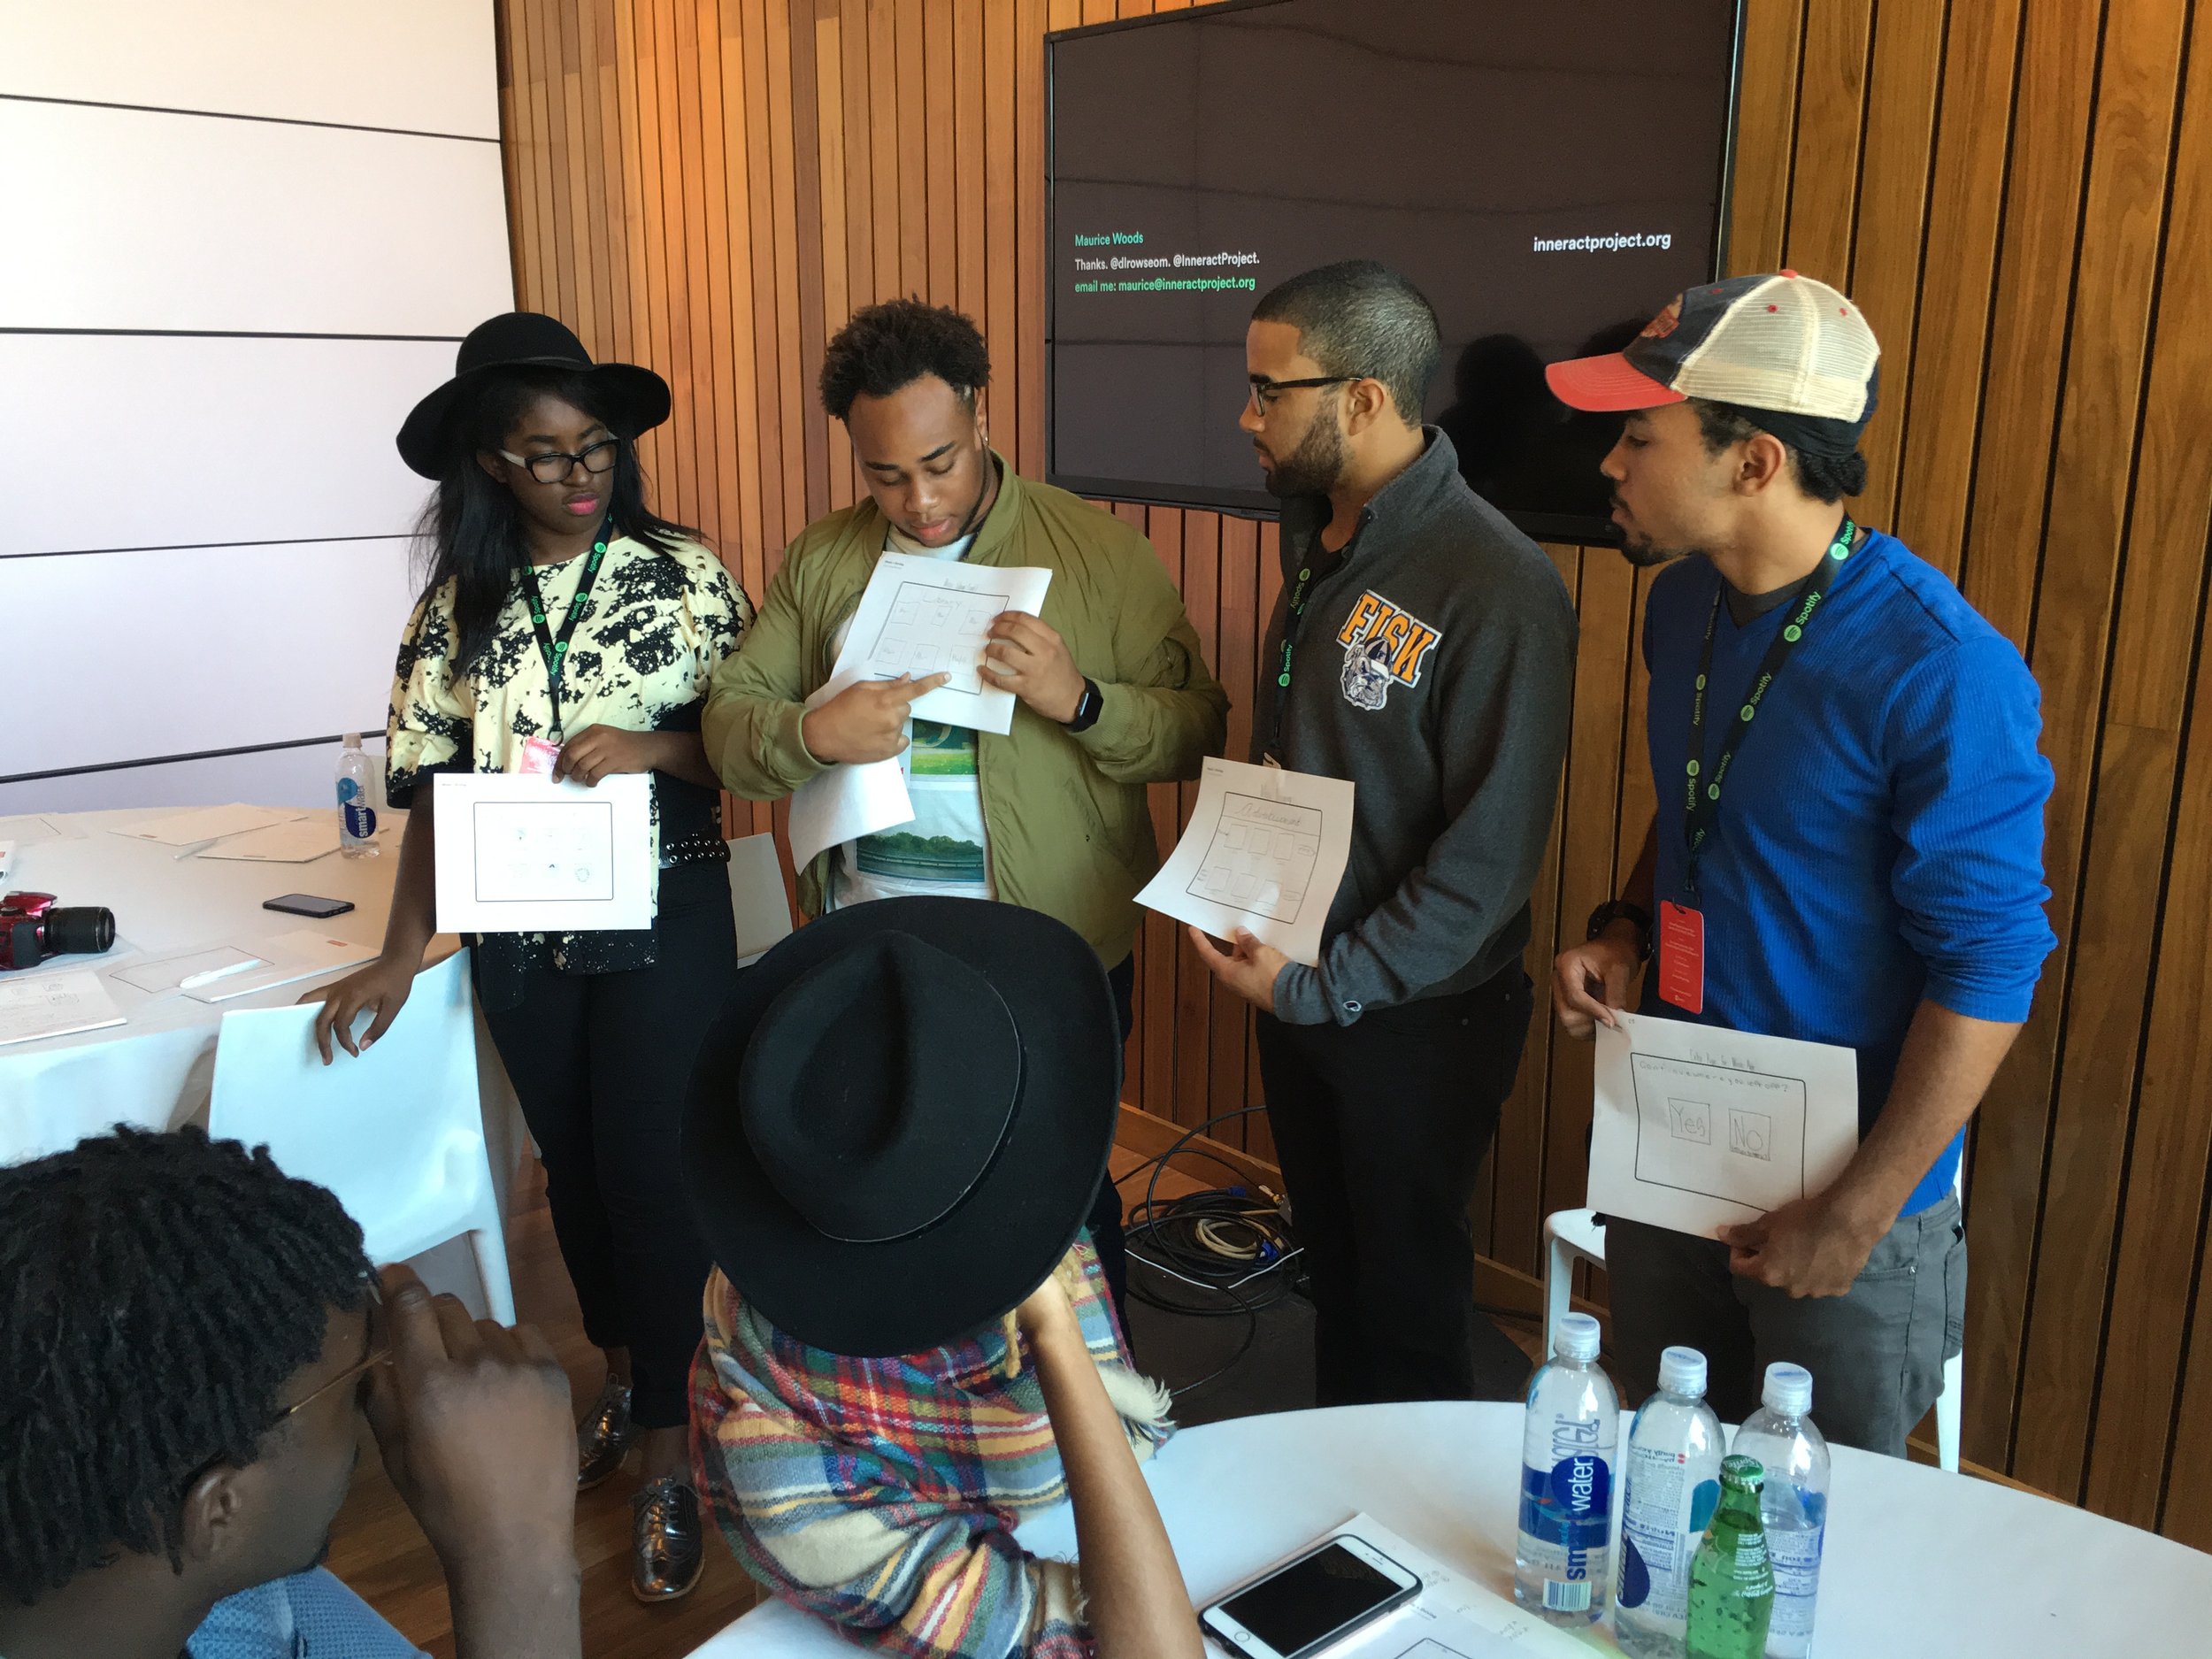 Design workshop at Spotify in New York for their HBCU conference